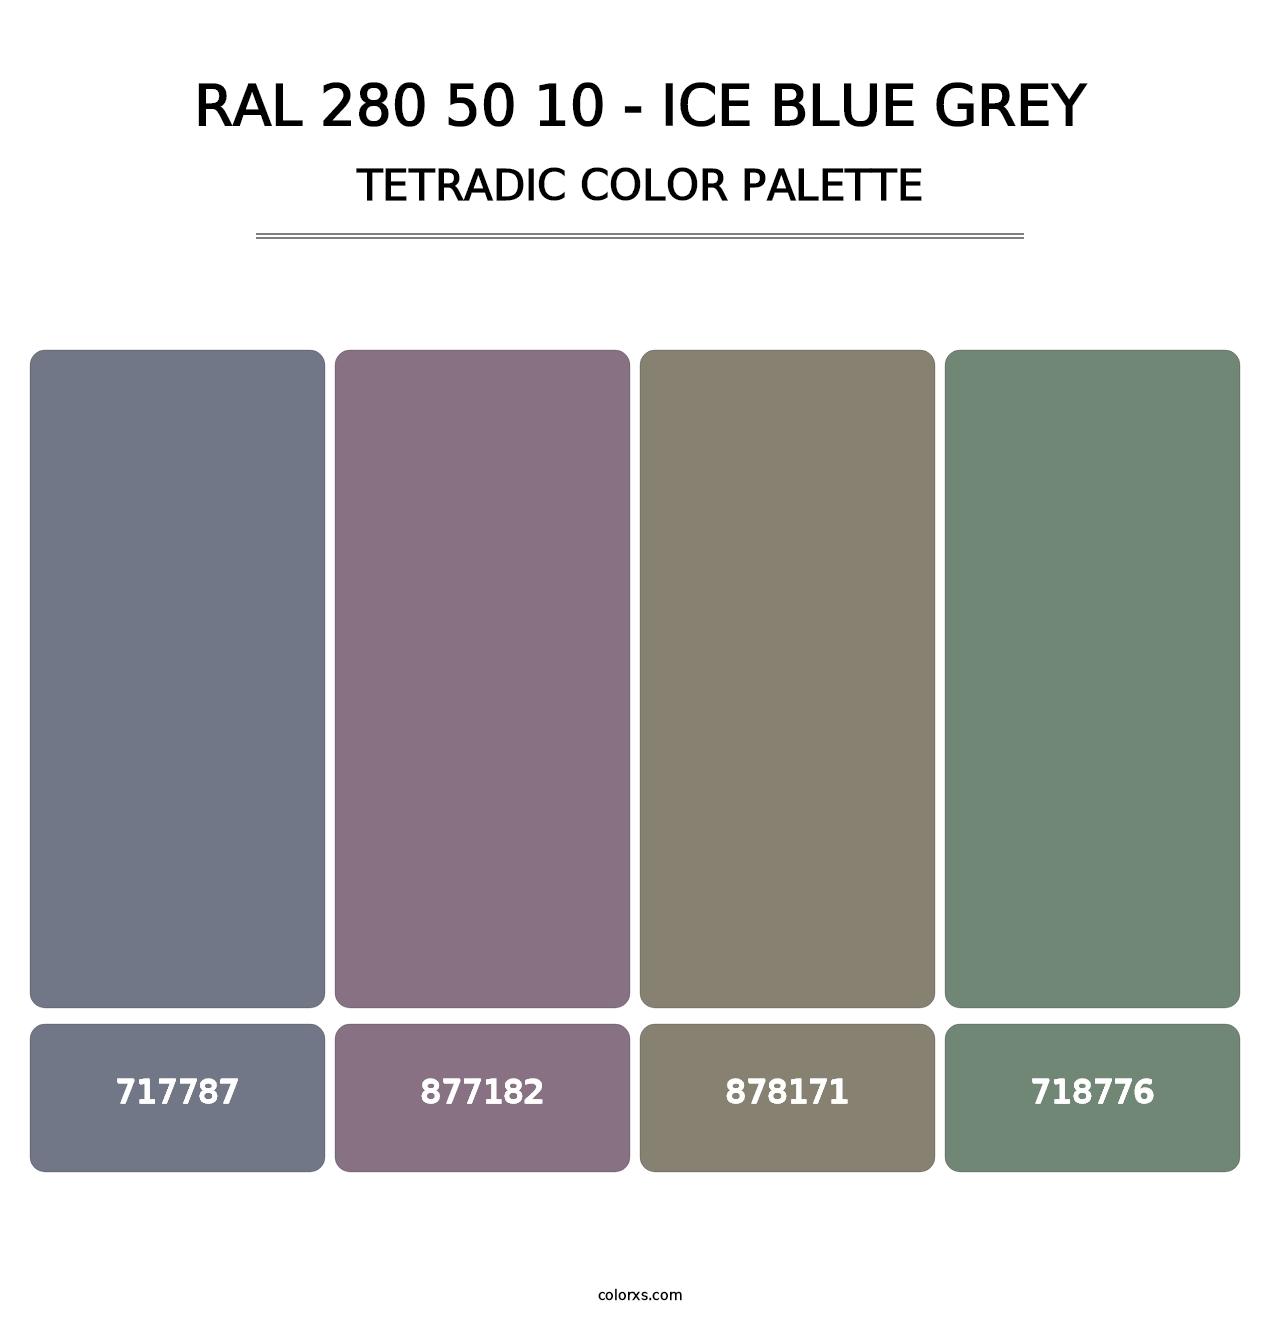 RAL 280 50 10 - Ice Blue Grey - Tetradic Color Palette